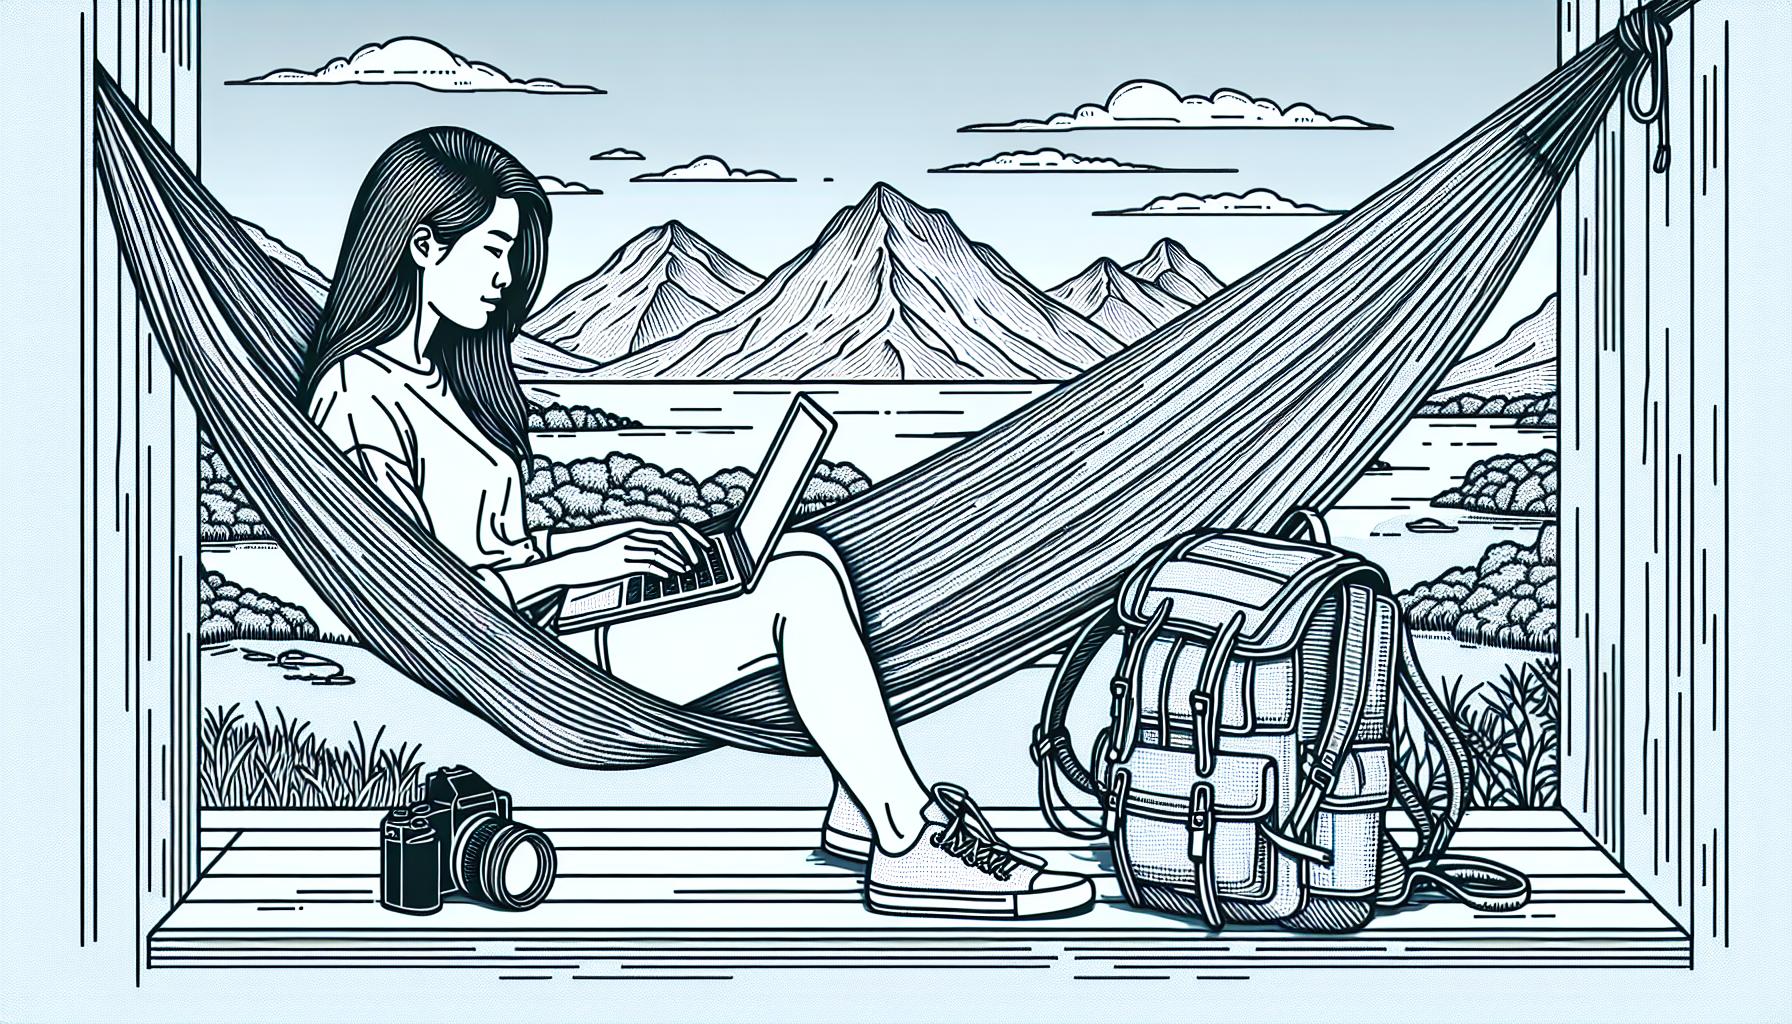 Is It Legal To Be A Digital Nomad?